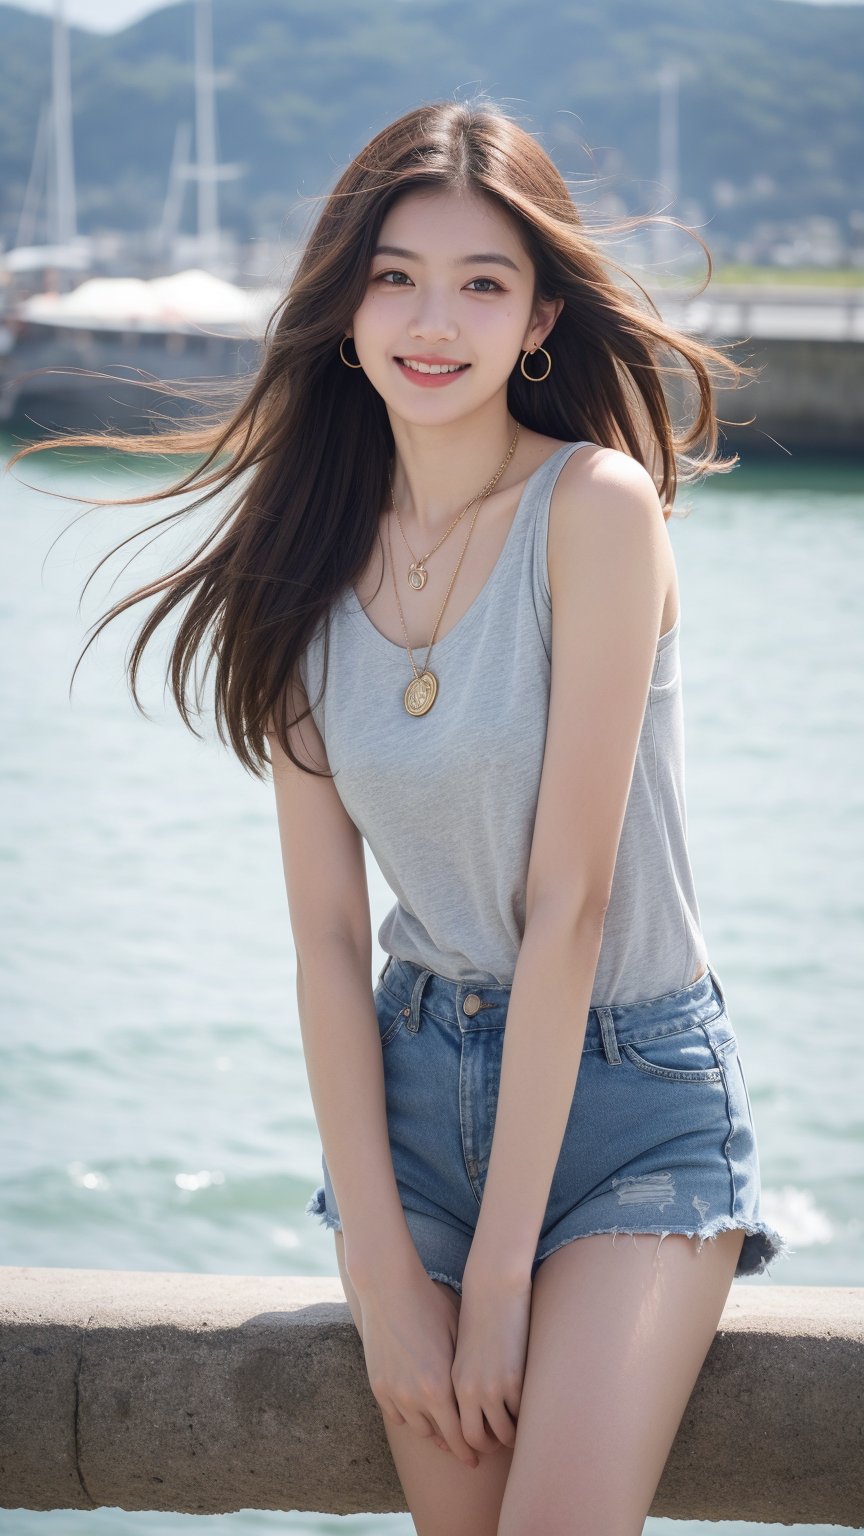 girl 1, ultra high definition, wind blowing hair, brown eyes, brown hair, delicate facial features, eye smile, {{{masterpiece}}}, {{highest quality}}, high resolution, high definition, natural movements of everyday life, dockside, pose, dark blue,fashion,girl1-den,Wearing a necklace,Wearing earrings